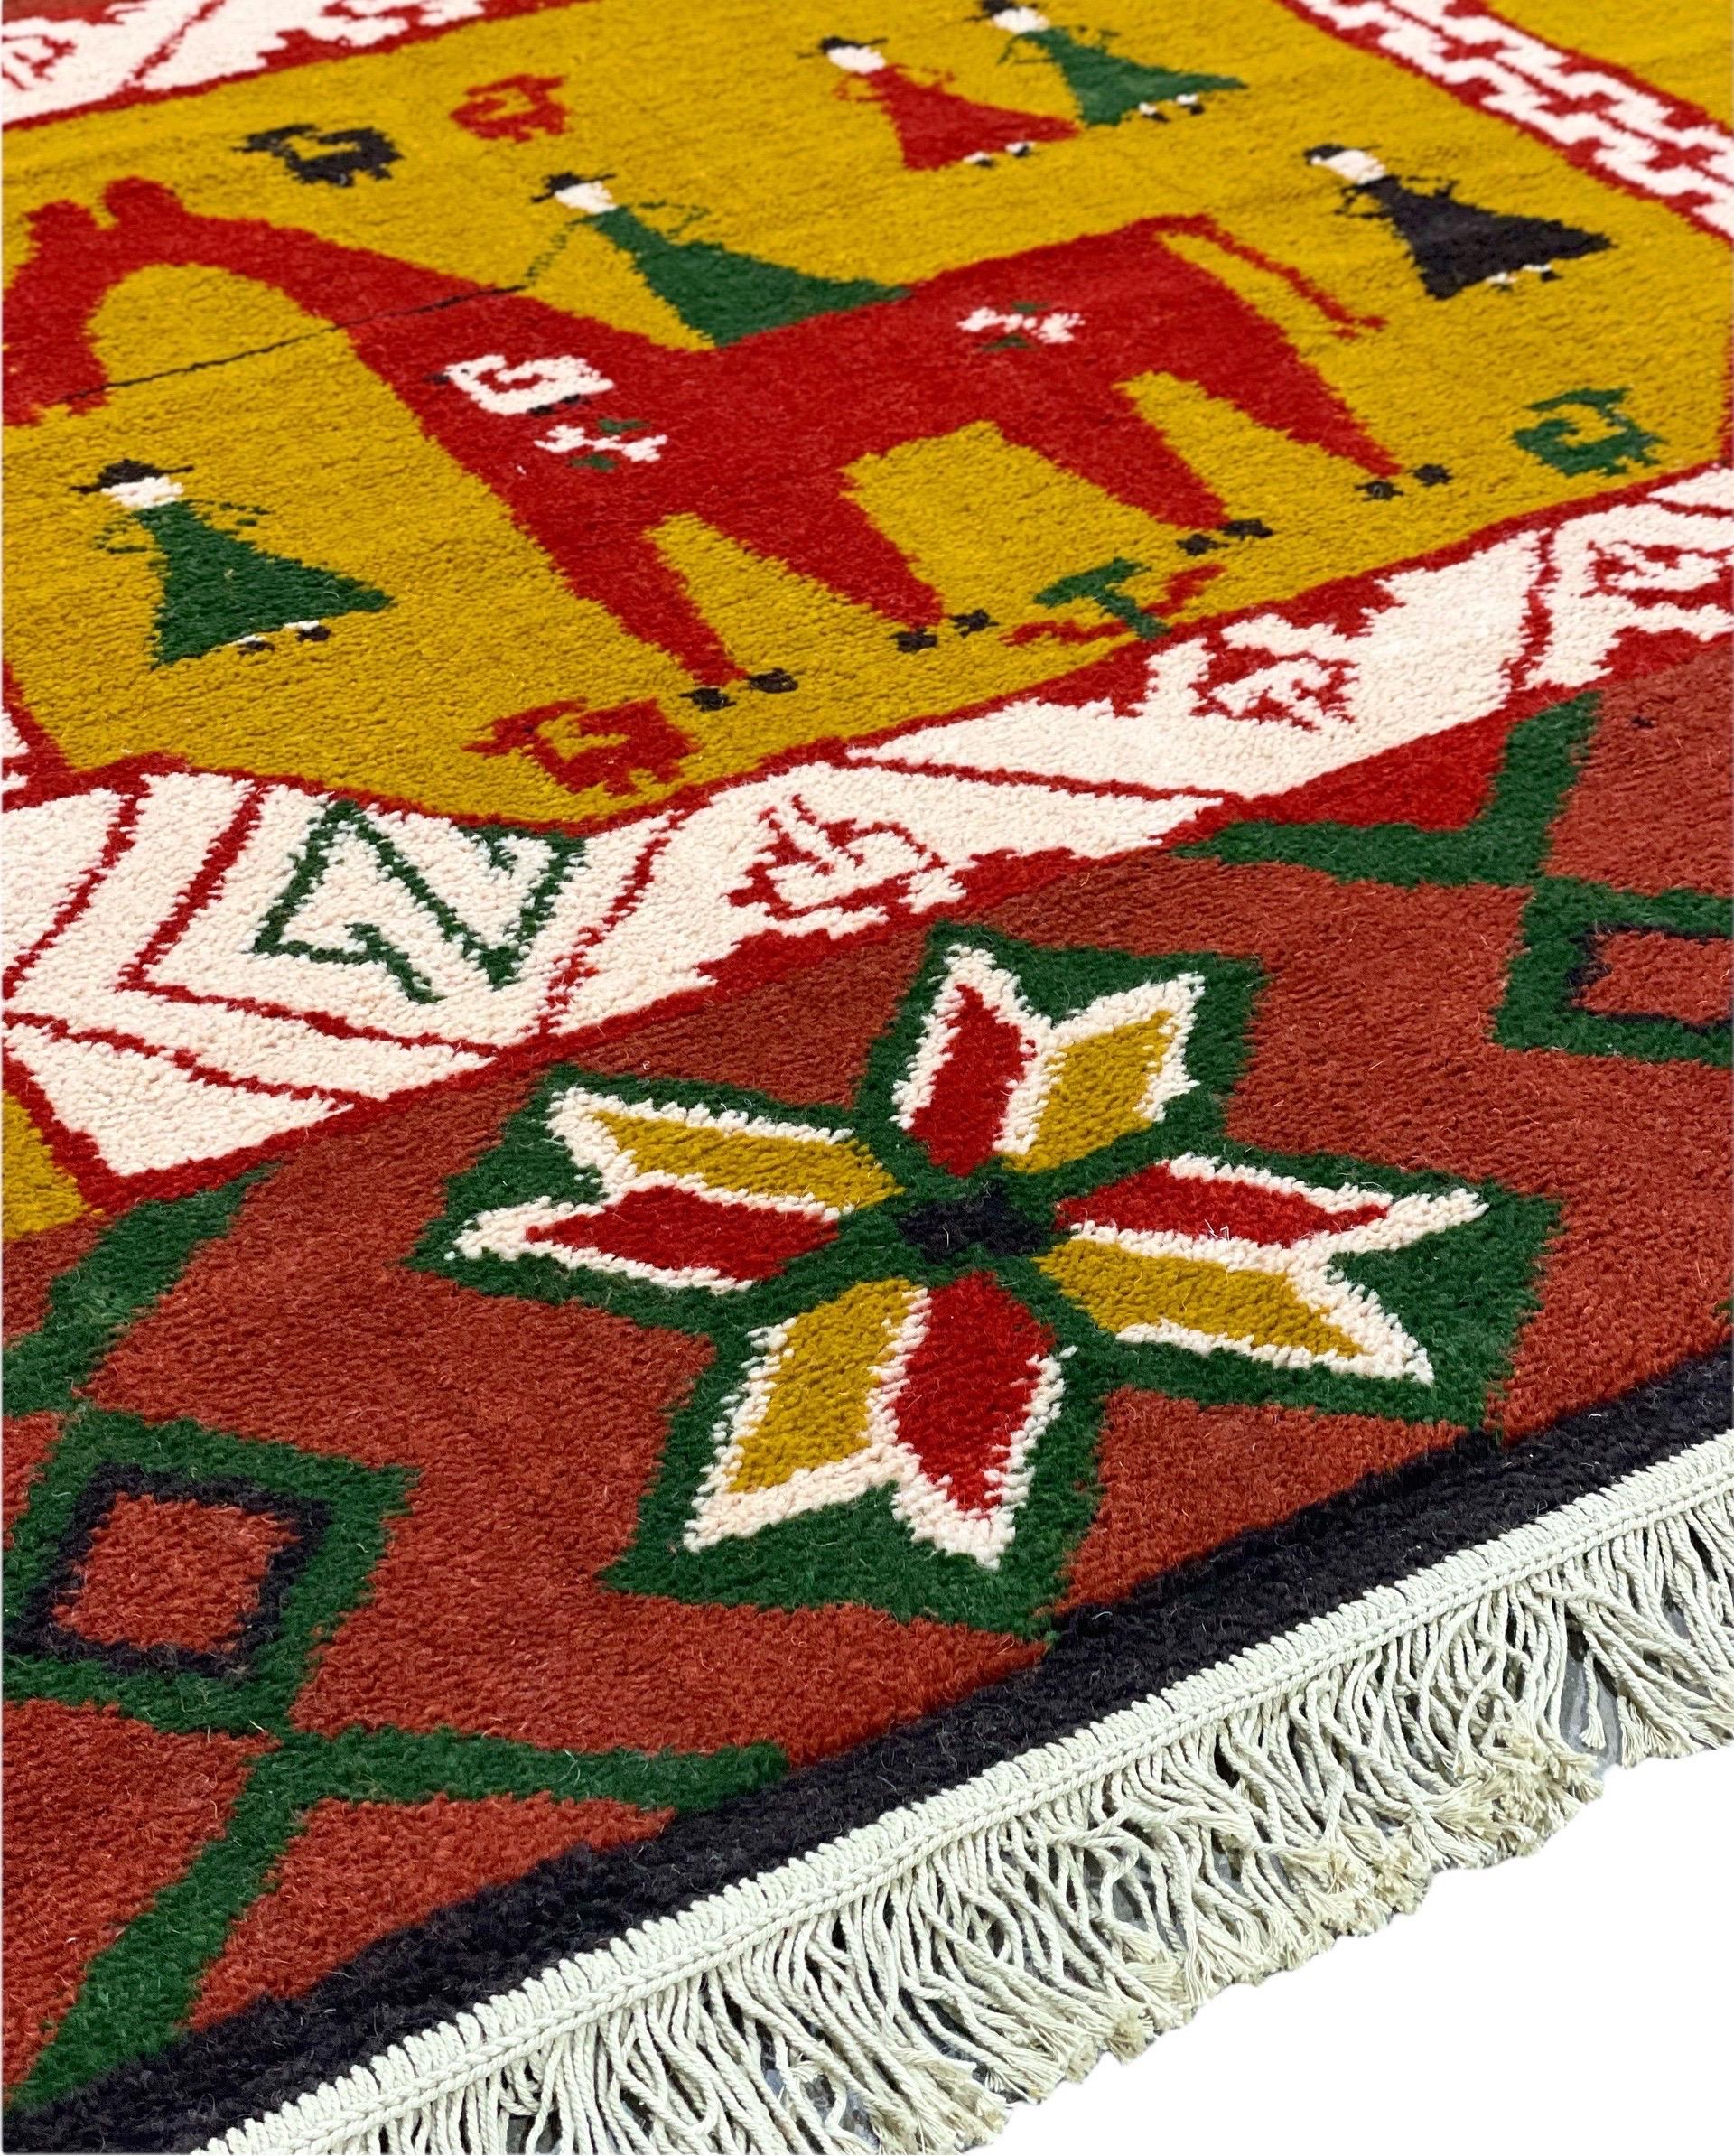 Amazing mid-century Danish modern Ege Rya wool area rug. Traditional modern Scandinavian motif in hues of red, green, yellow, white and black. Red tones are rich and lean towards crimson. The yellow tones are a vibrant harvest gold.
Rug retains